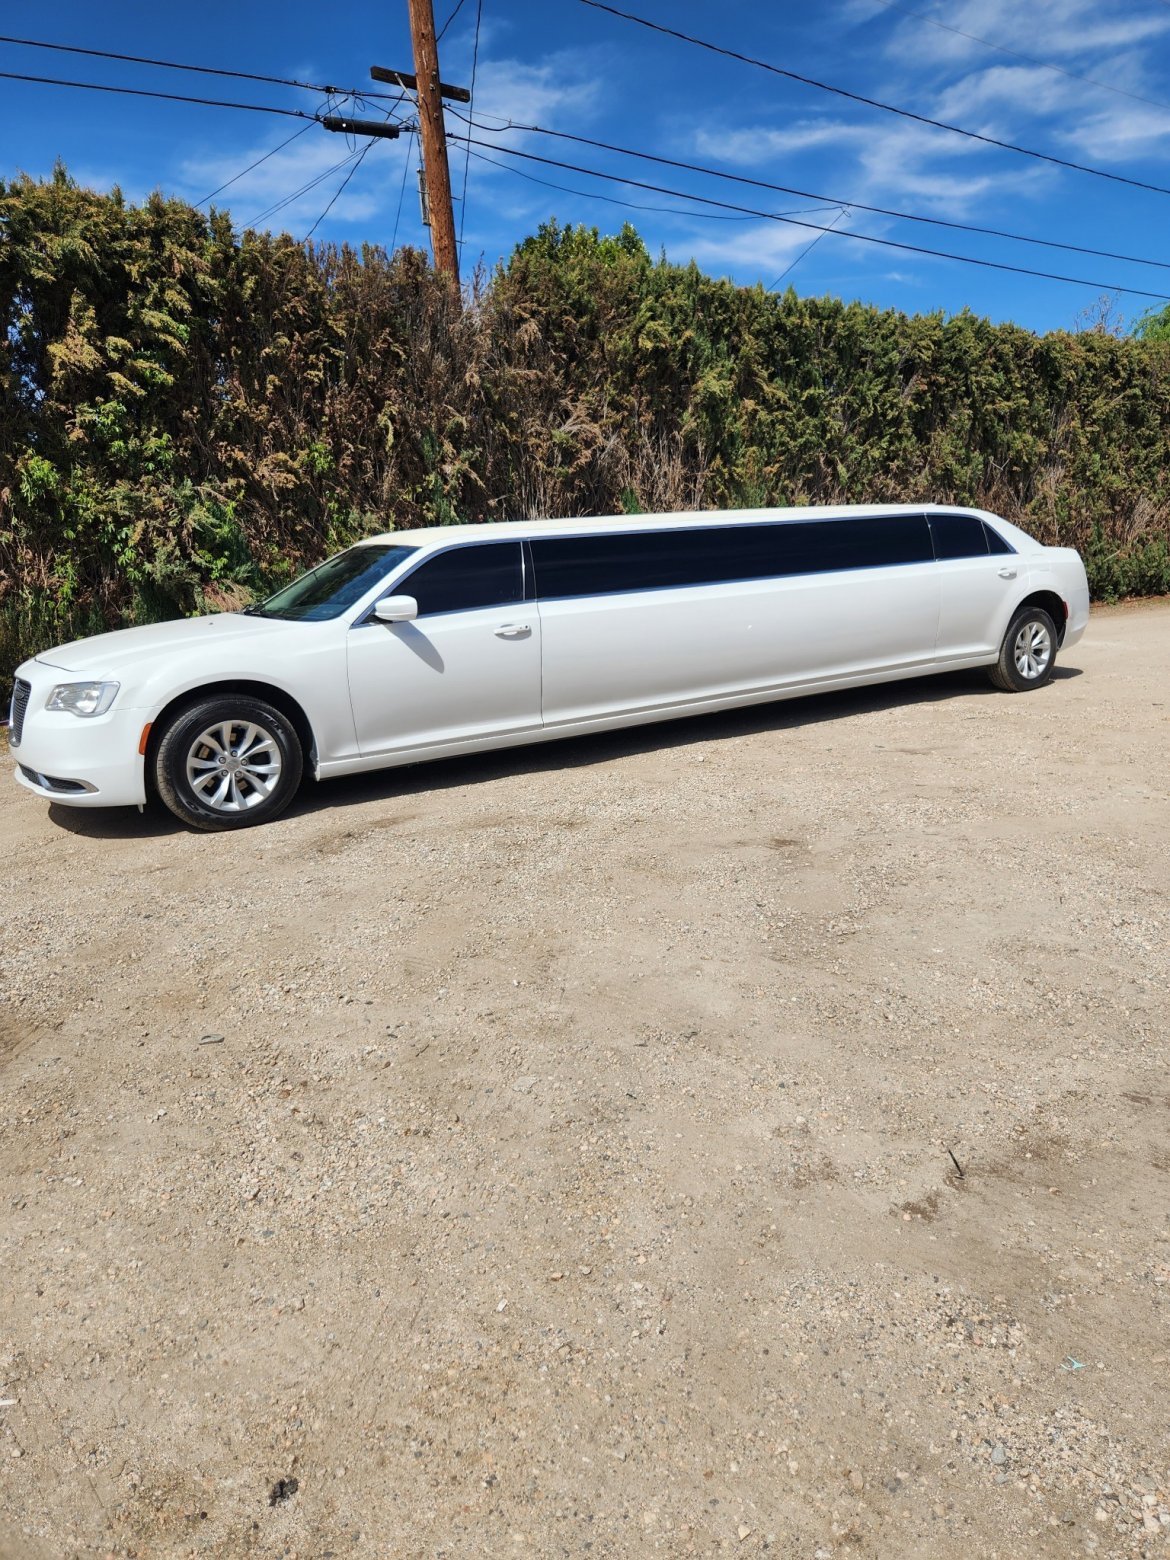 Limousine for sale: 2017 Chrysler 300 by First Class Coachworks of Riverside